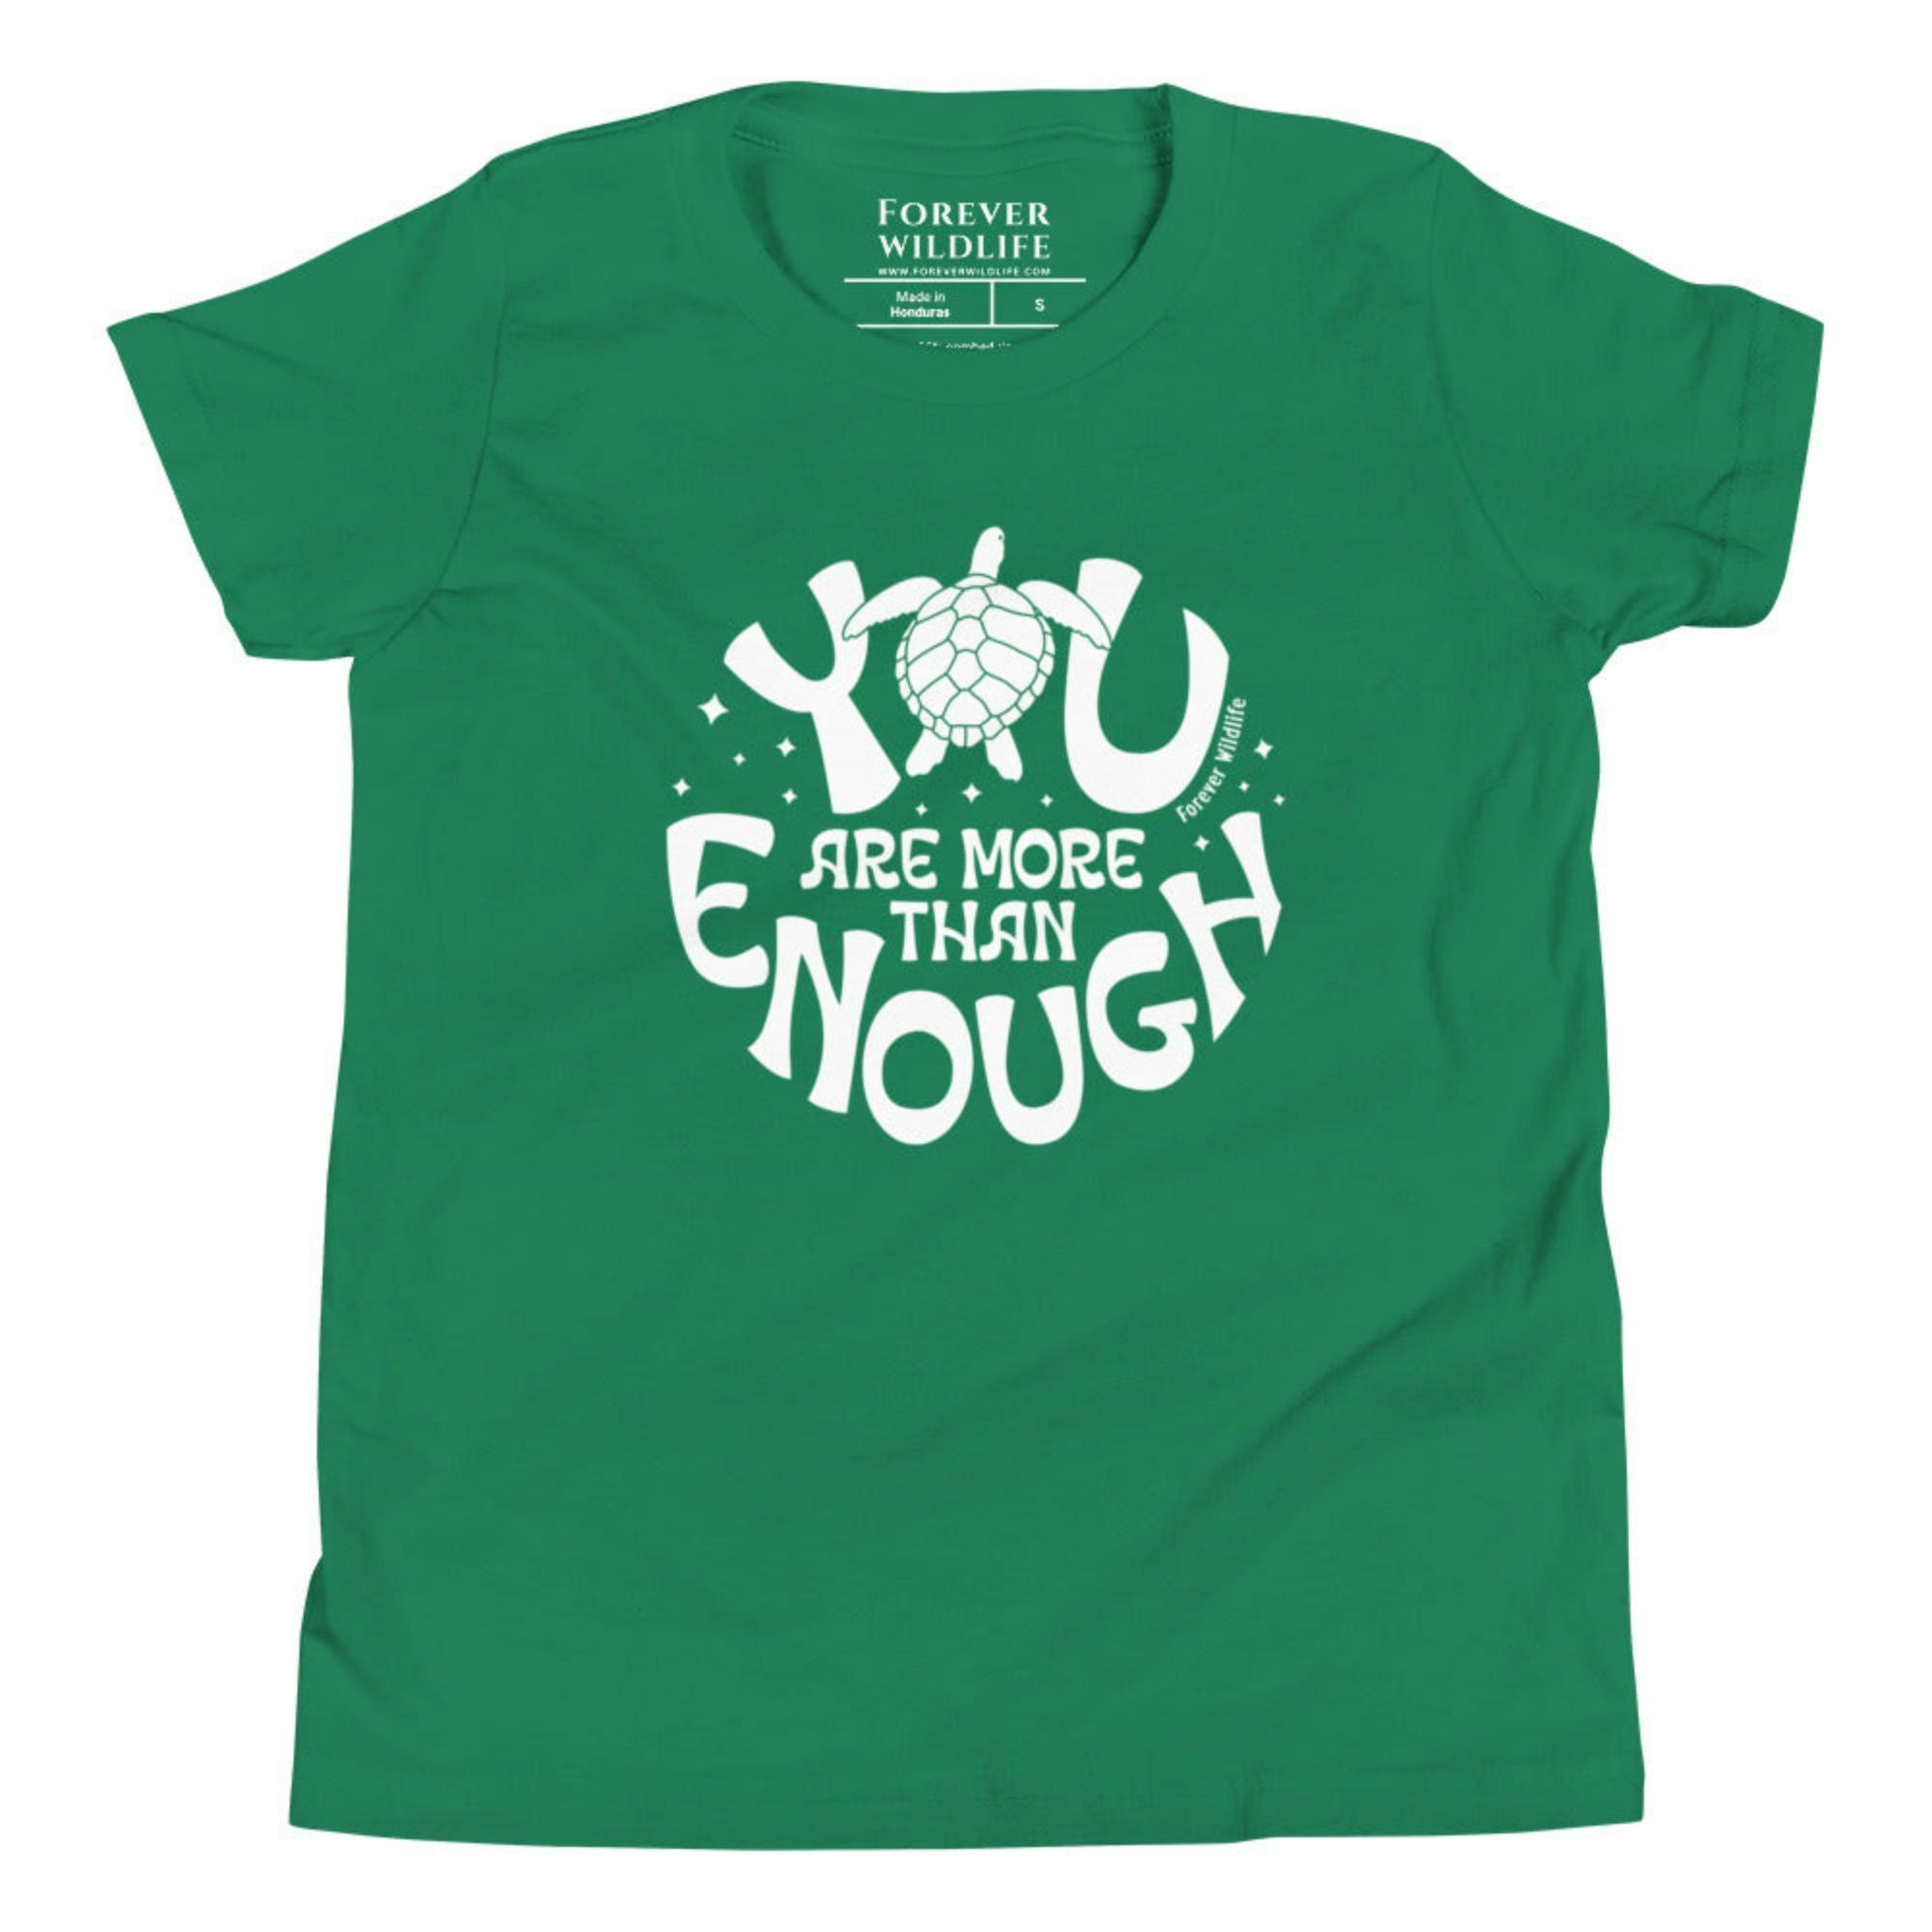 Kelly Youth T-Shirt with Sea Turtle graphic as part of Wildlife T-Shirts, Wildlife Clothing & Apparel by Forever Wildlife